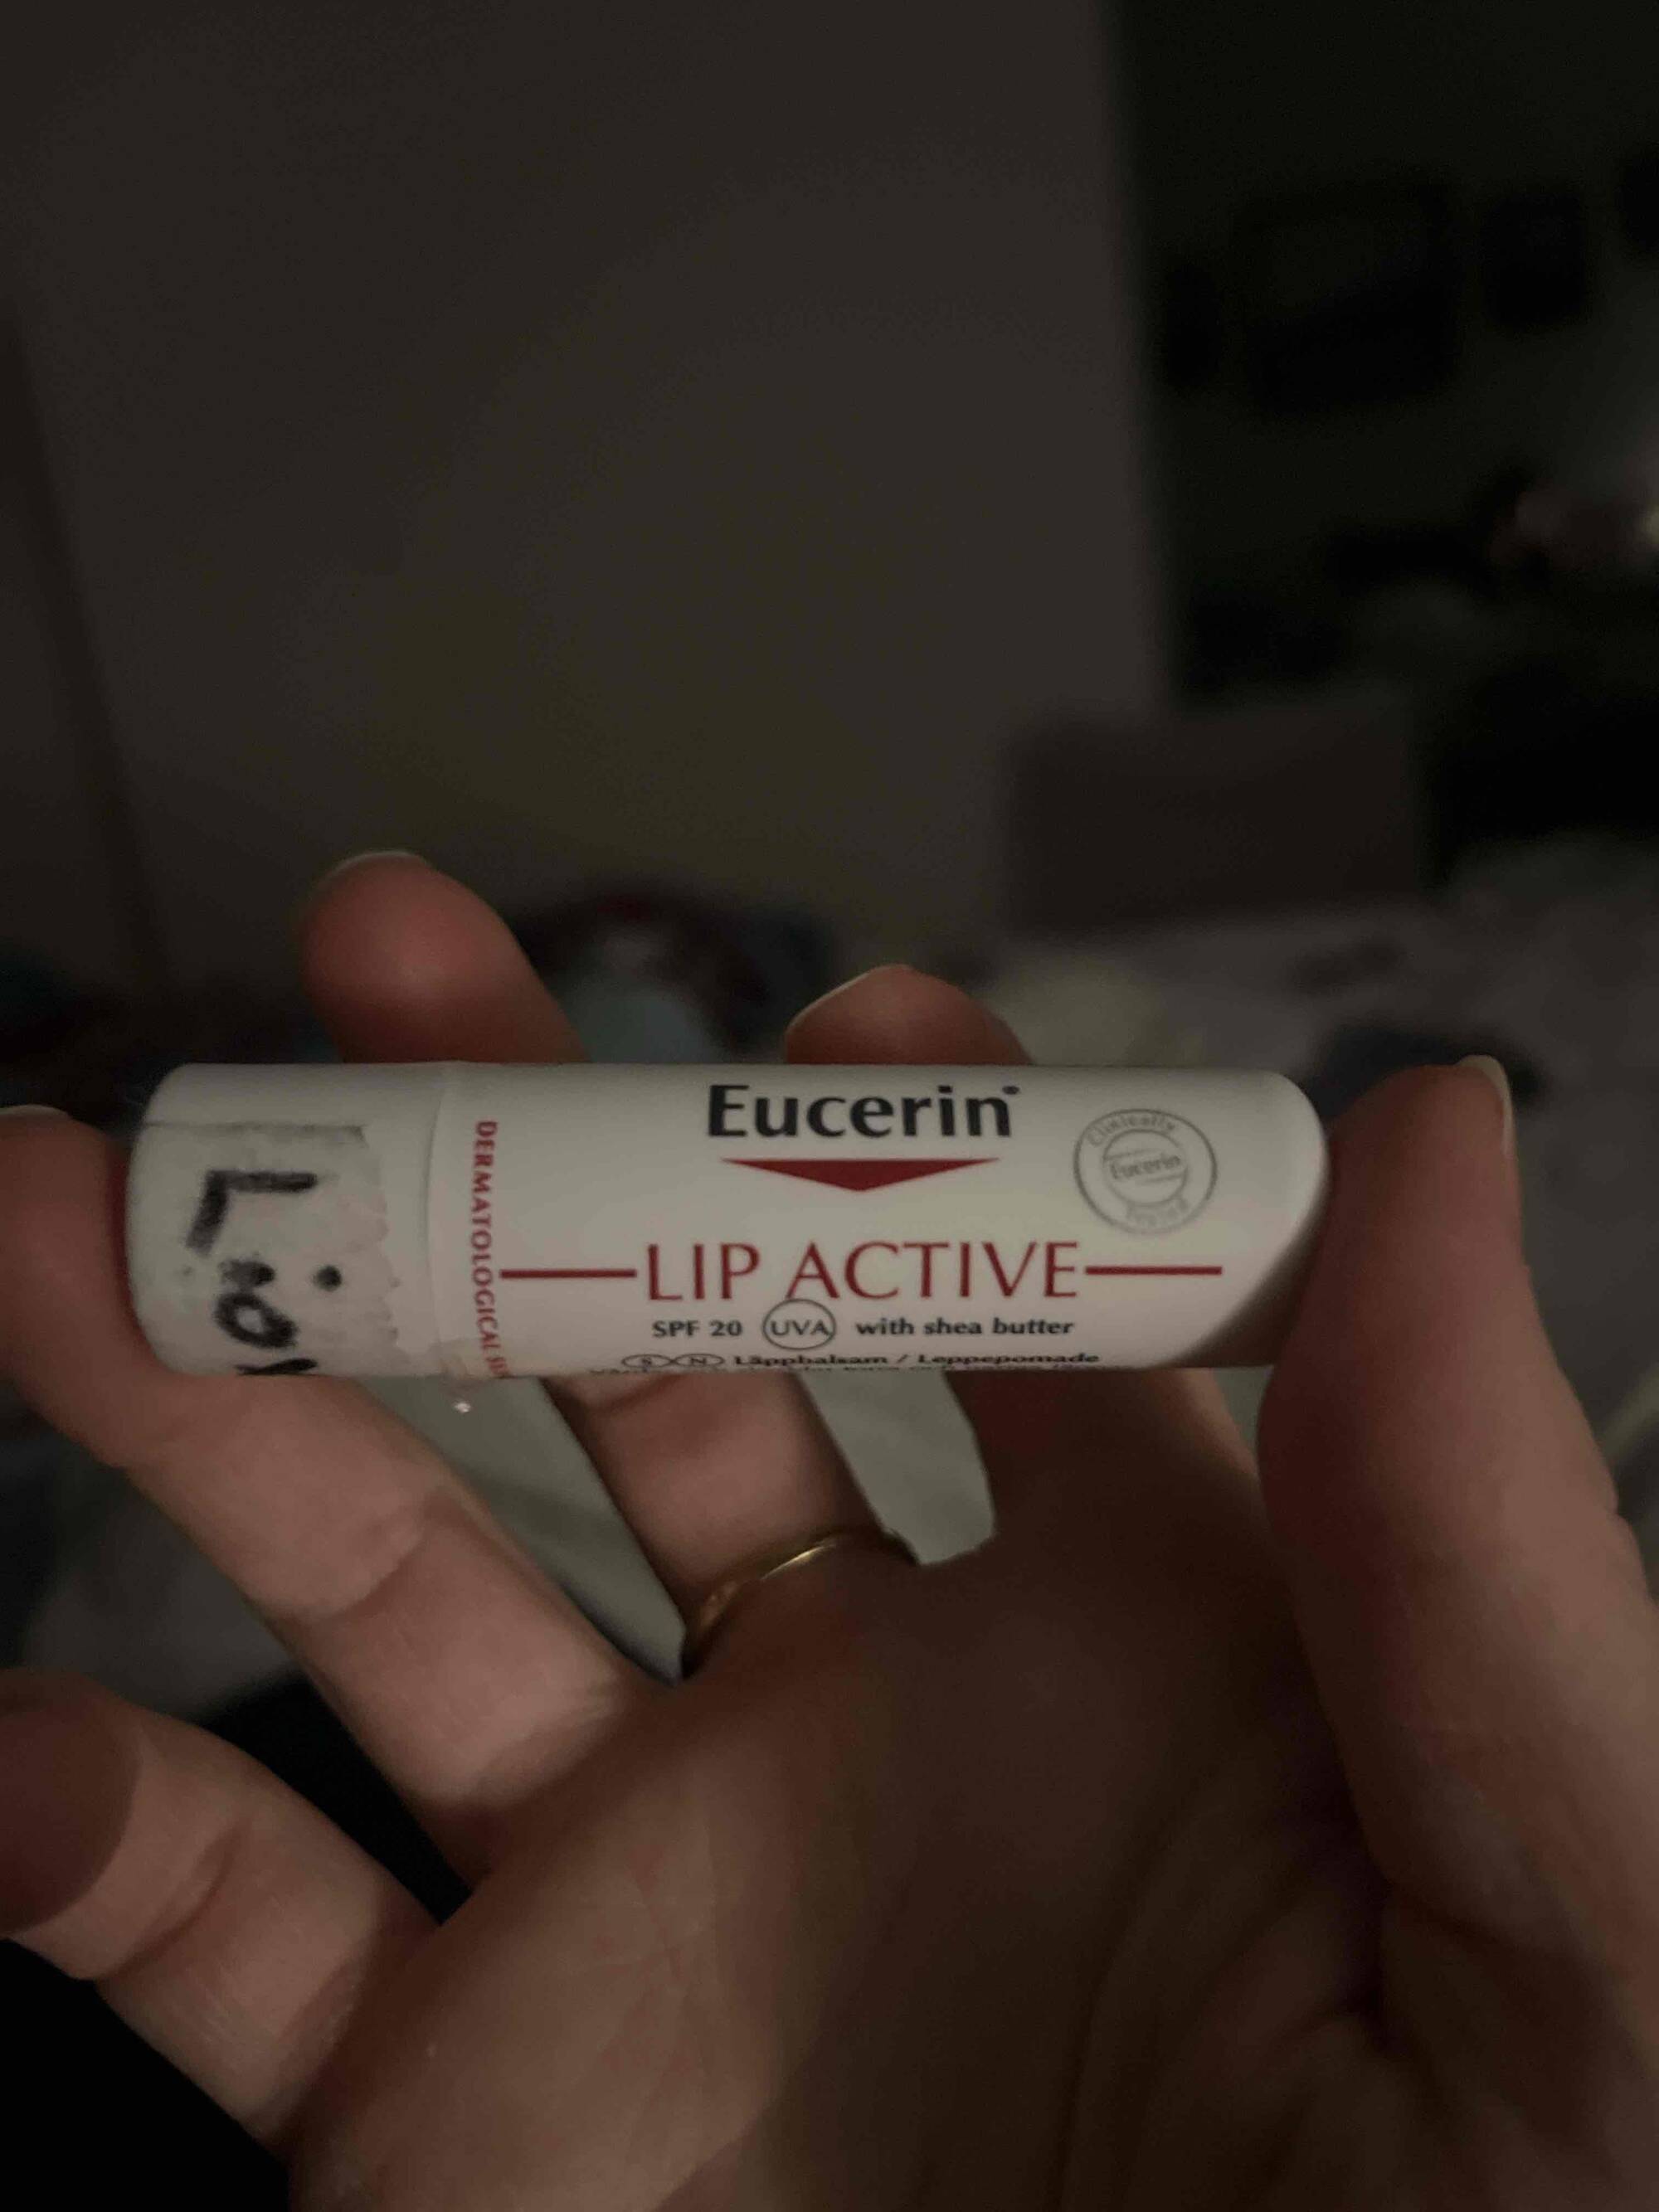 EUCERIN - Lip active SPF 20 with shea butter